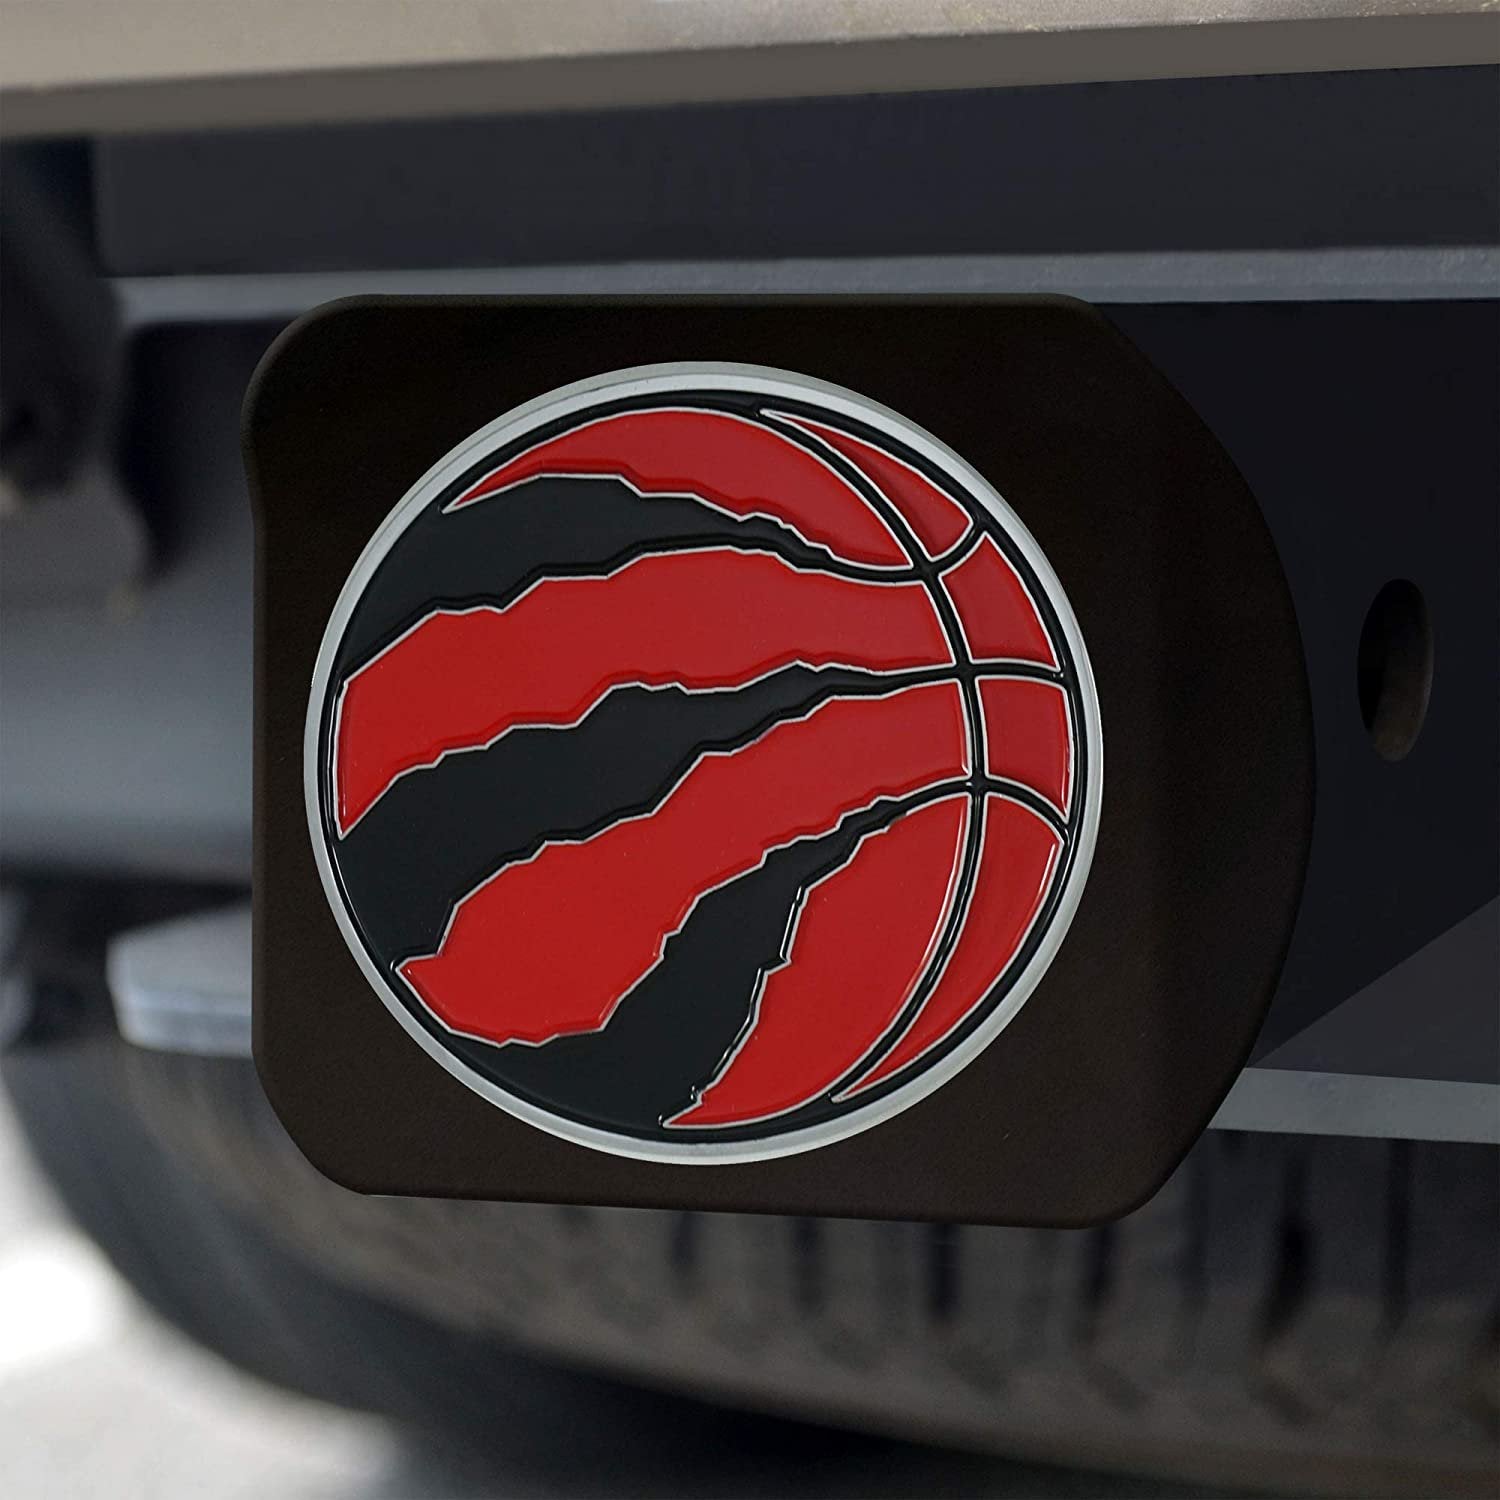 Toronto Raptors Hitch Cover Black Solid Metal with Raised Color Metal Emblem 2" Square Type III